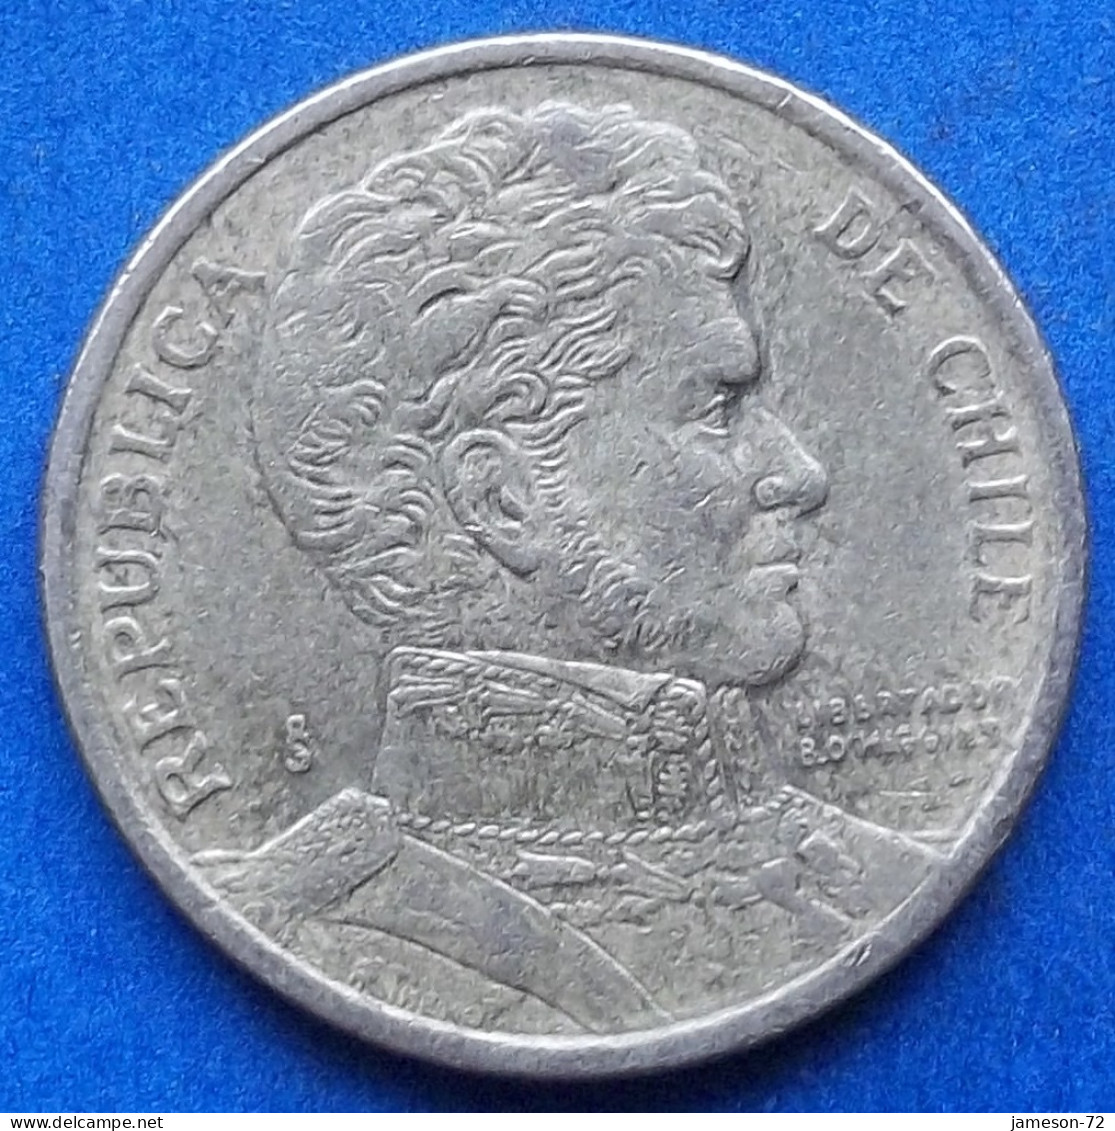 CHILE - 10 Pesos 2000 So KM# 228.2 Monetary Reform (1975) - Edelweiss Coins - Chile